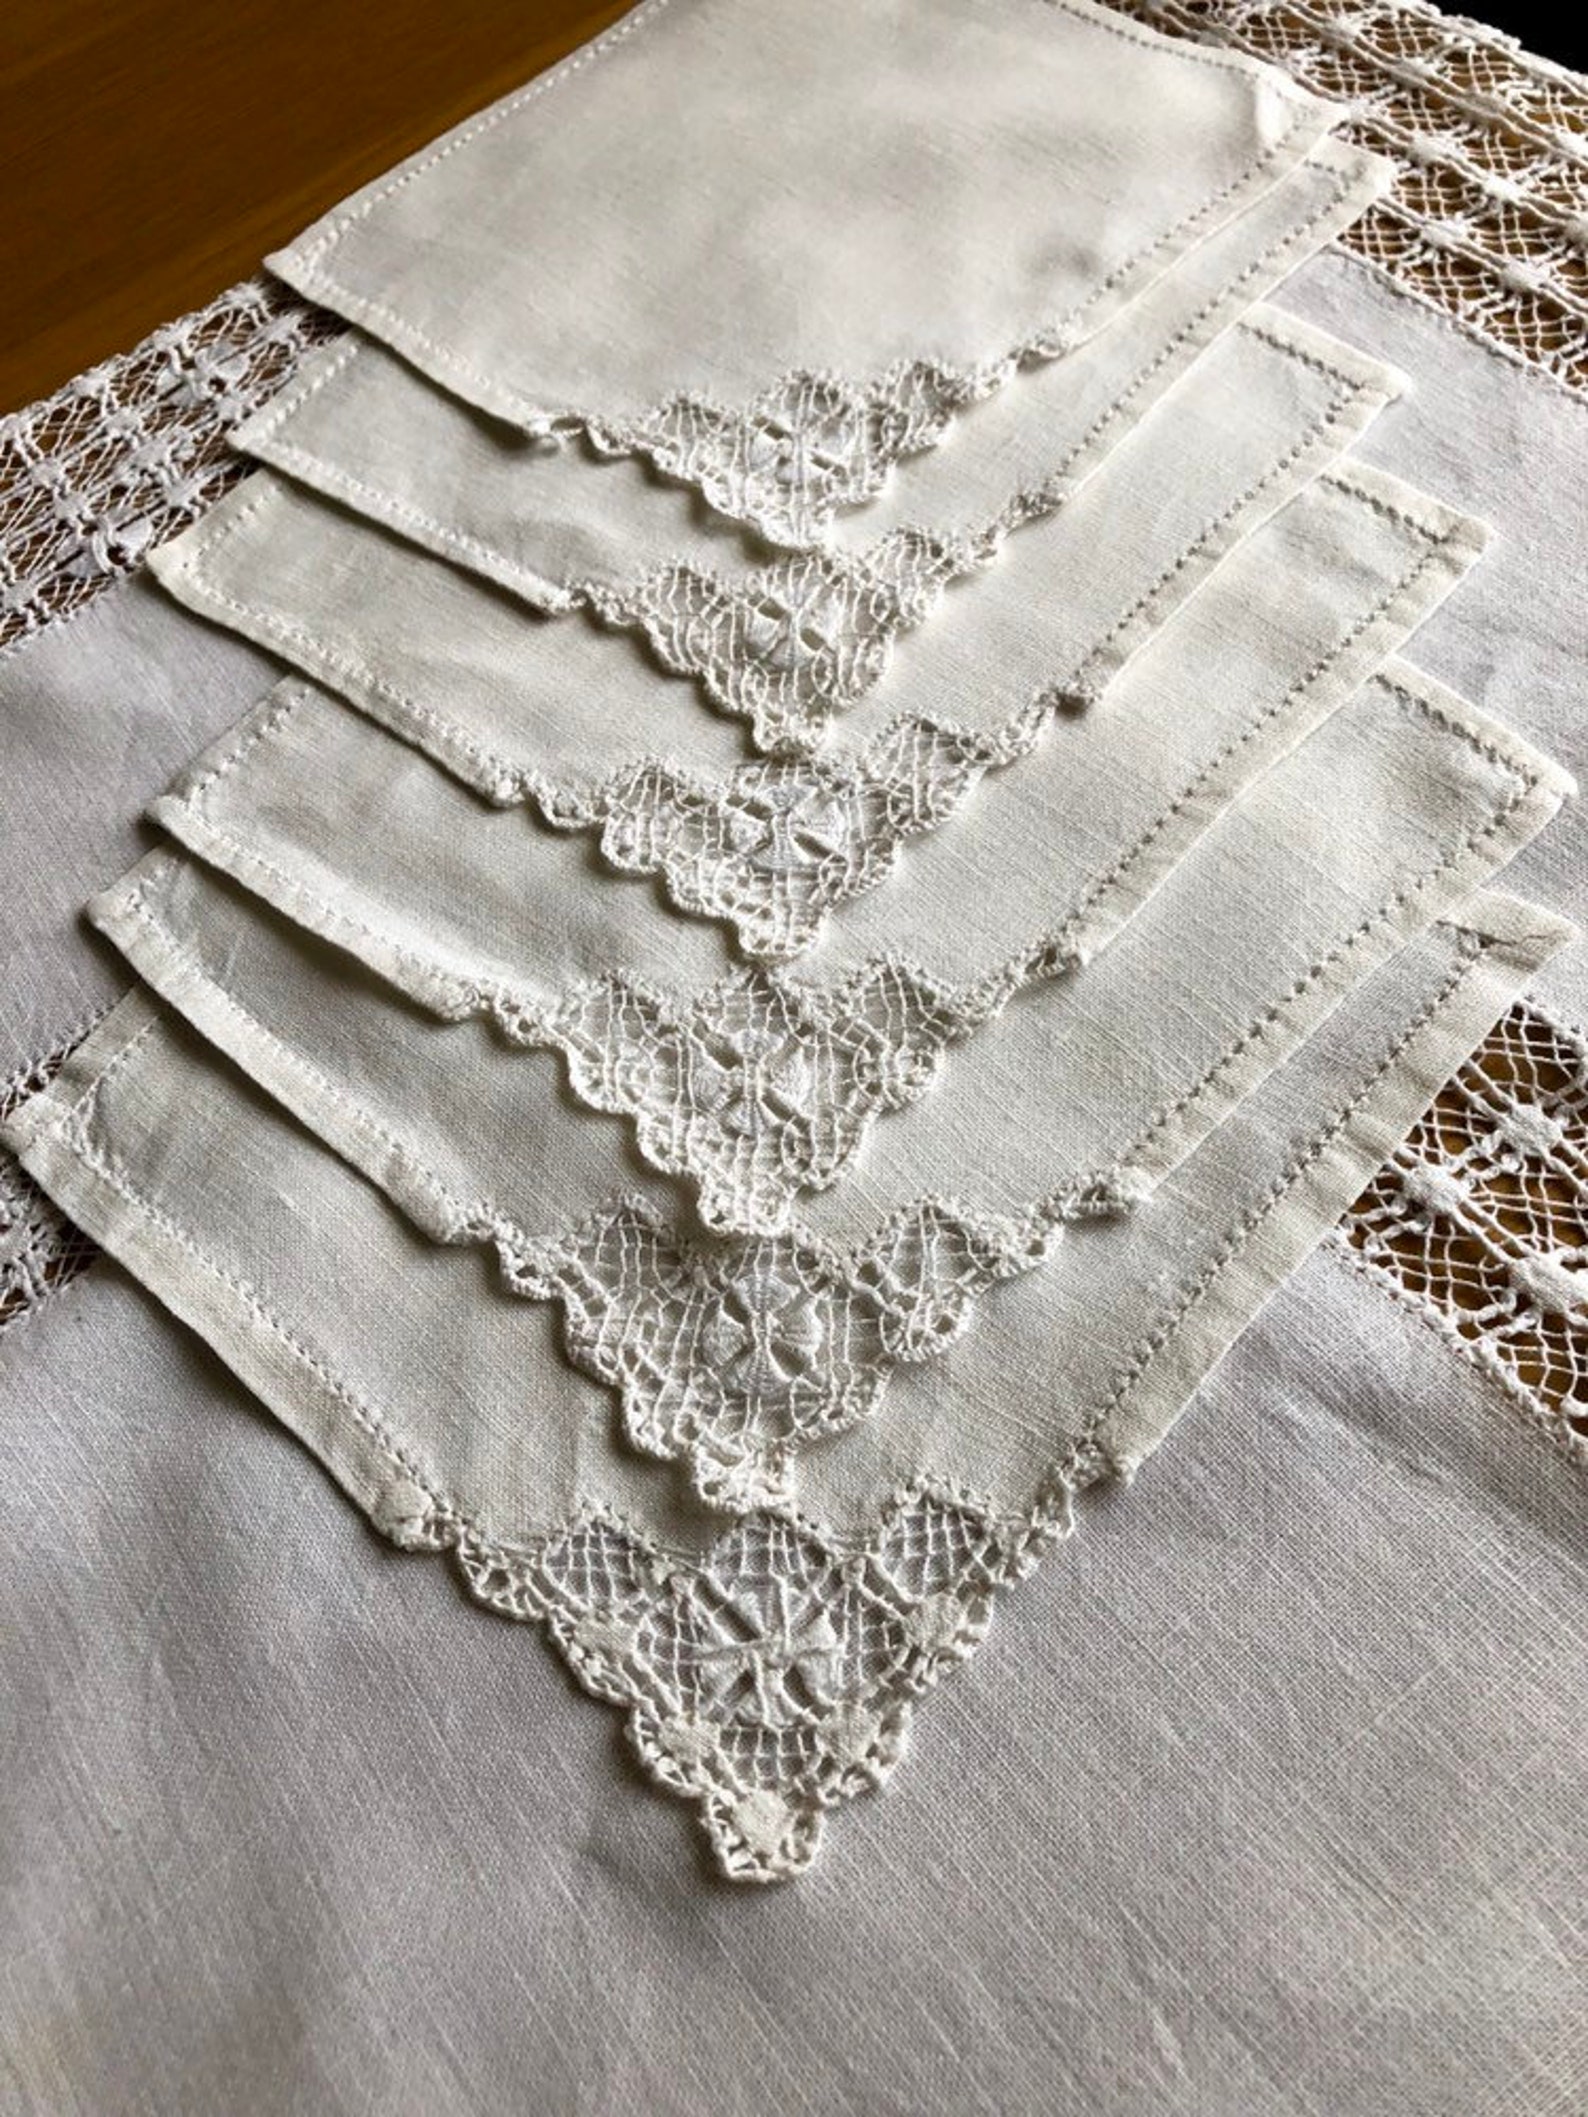 Stunning vintage maltese bobbin lace tablecloth with 6 | Etsy